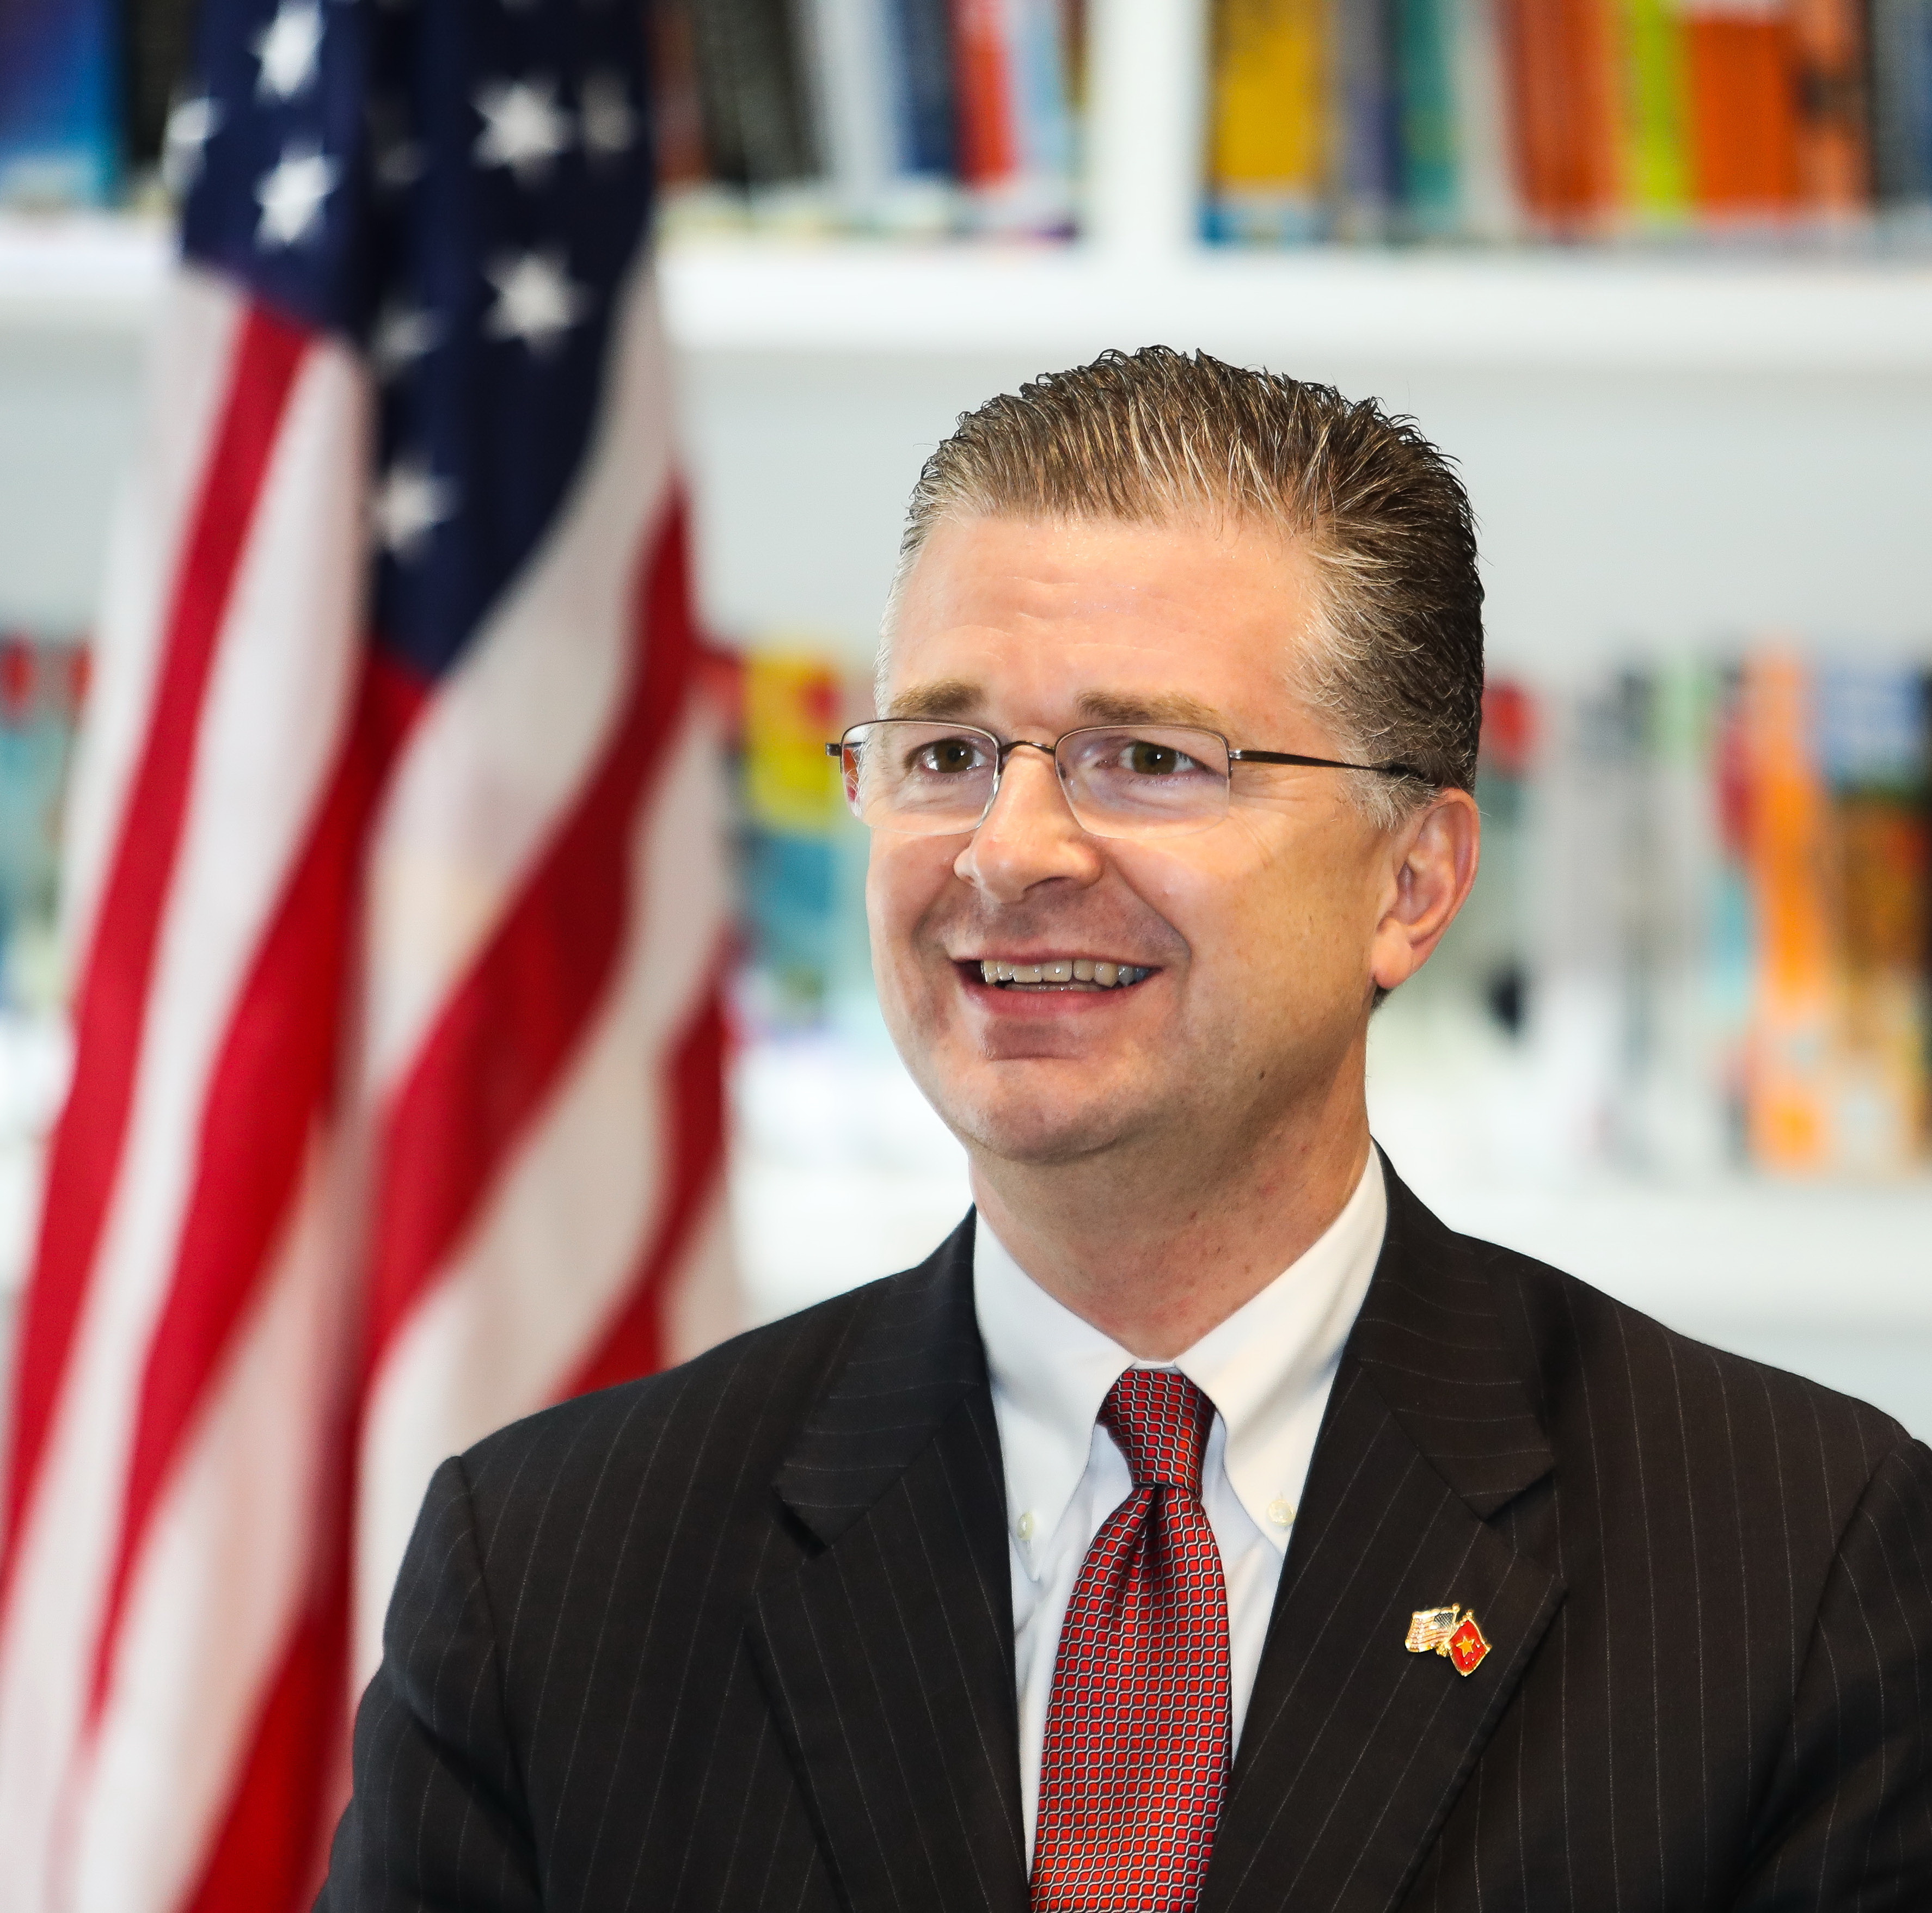 Exclusive interview: US ambassador on cooperation, trade, aircraft carrier visit to Vietnam